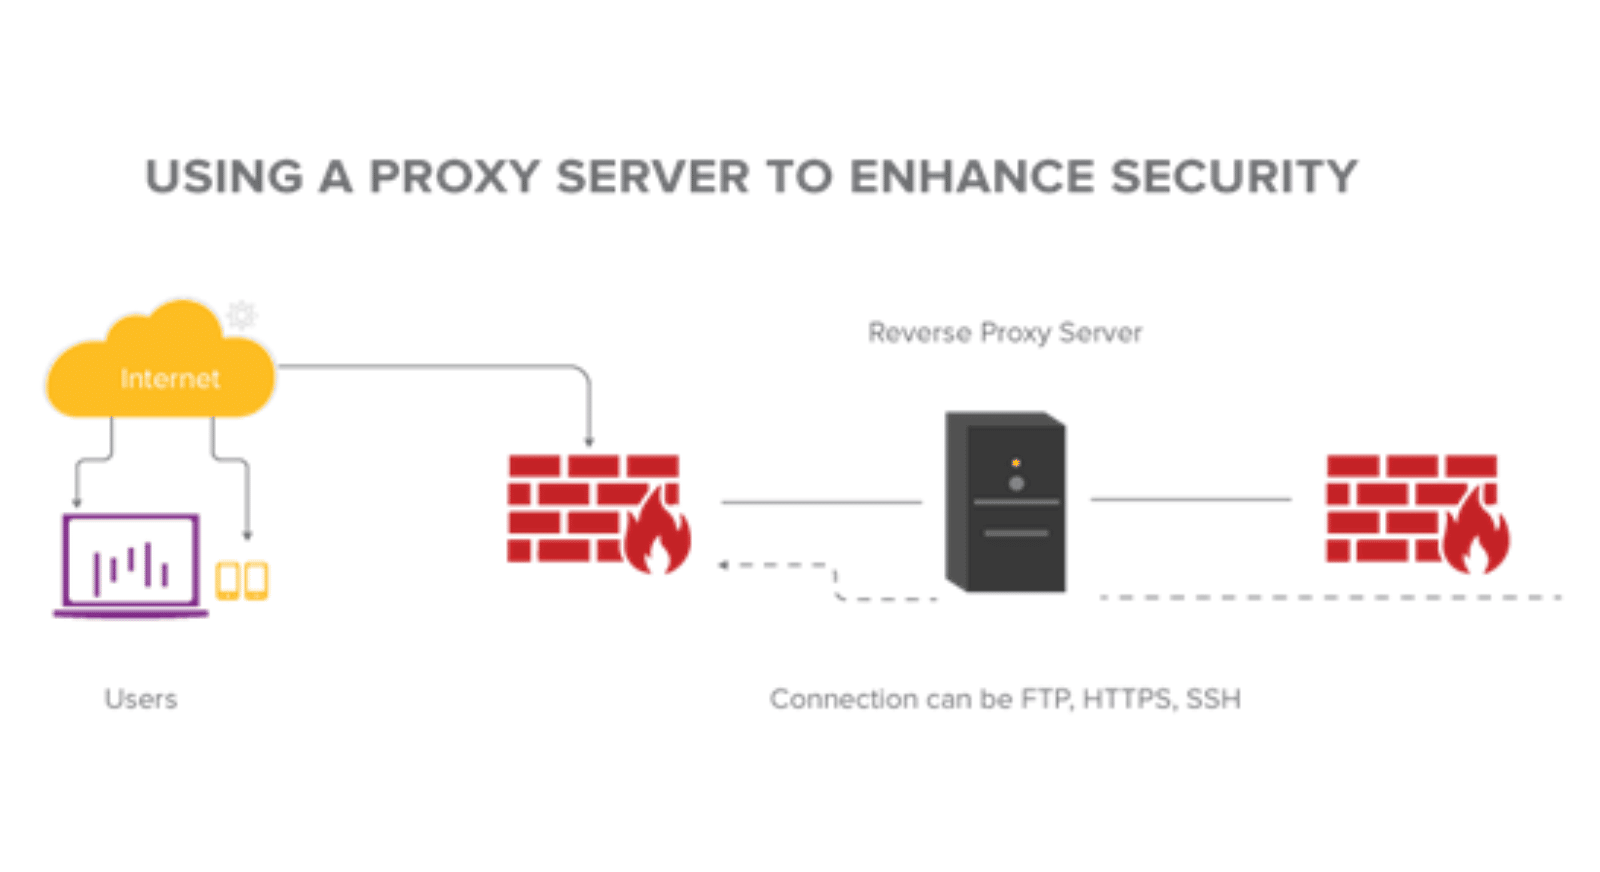 A proxy server can serve as a firewall against attacks